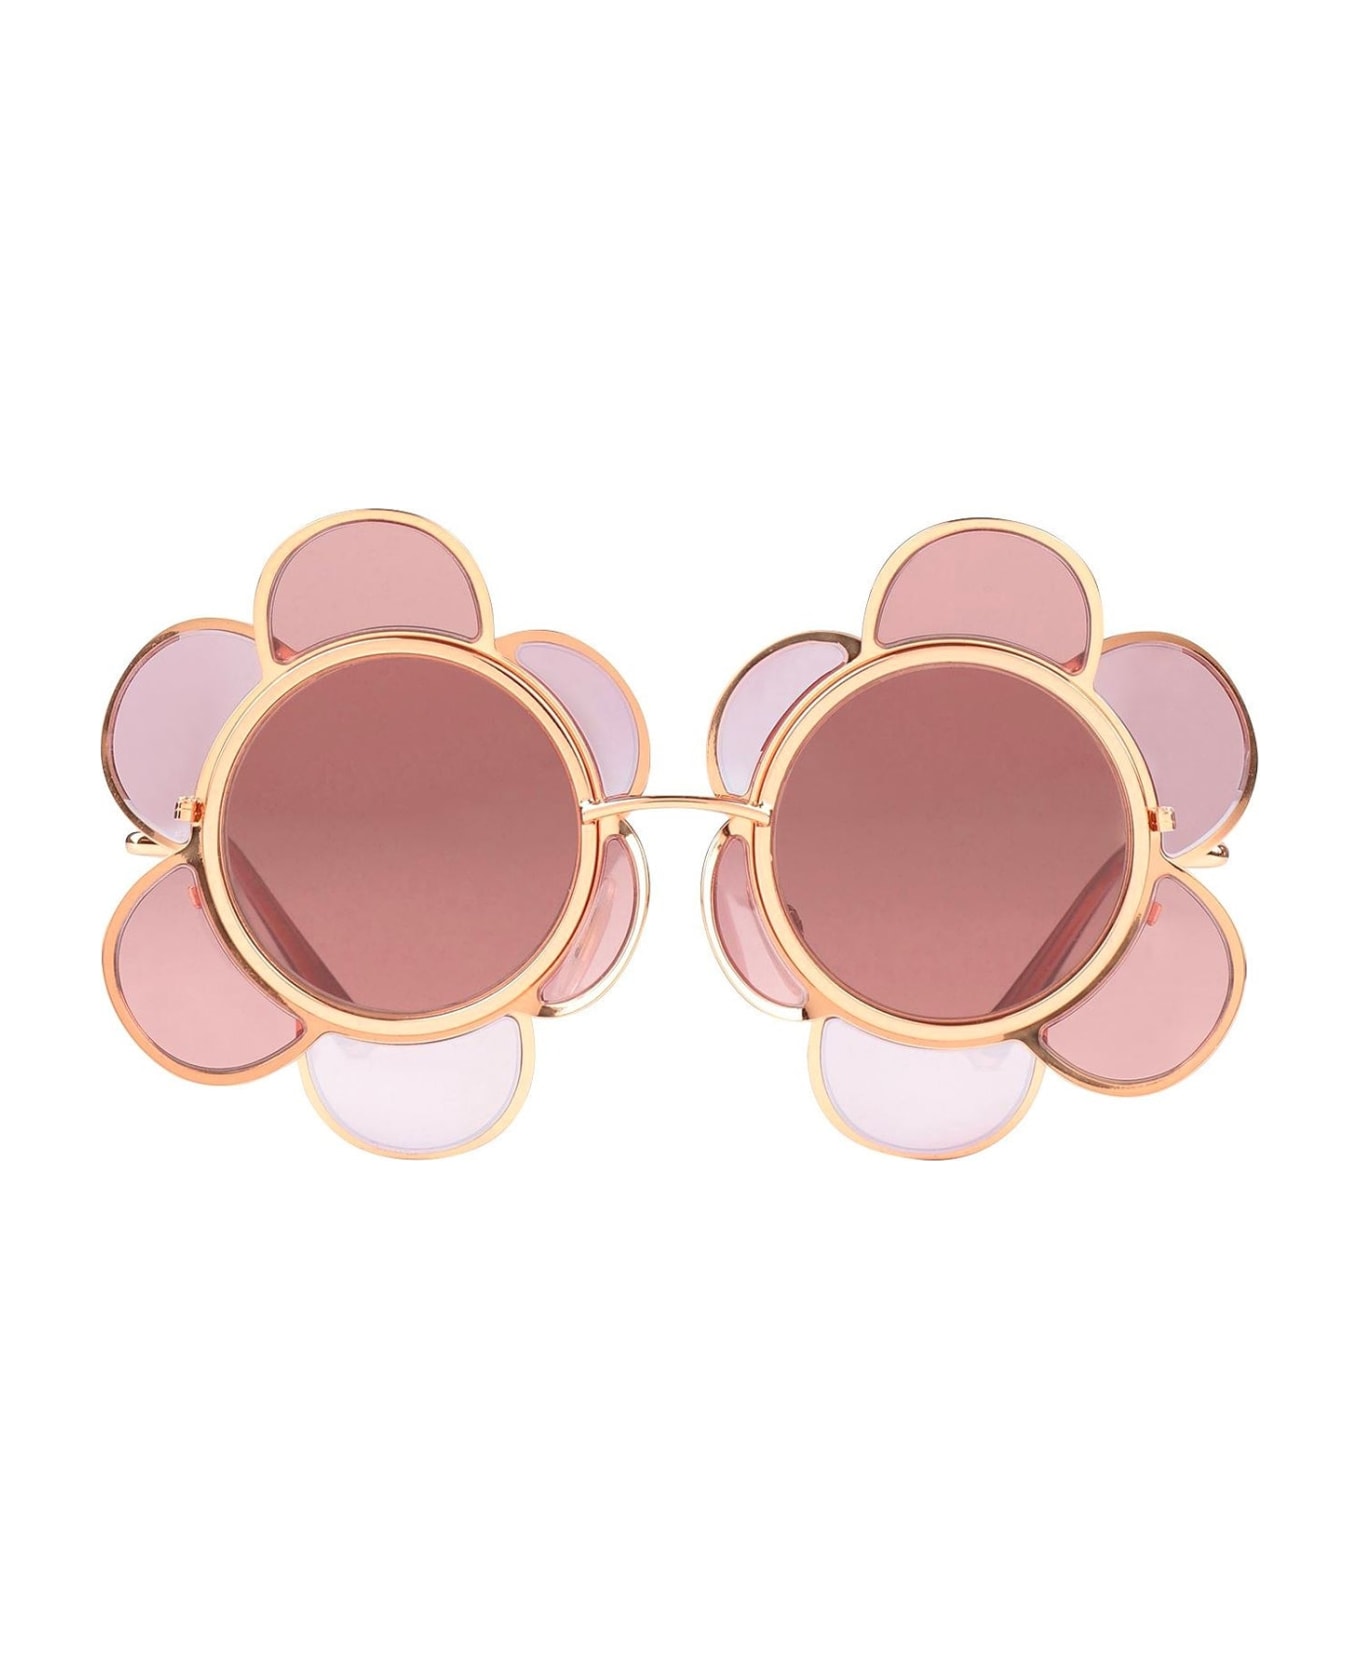 Dolce & Gabbana Special Edition Flower Sunglasses - Pink